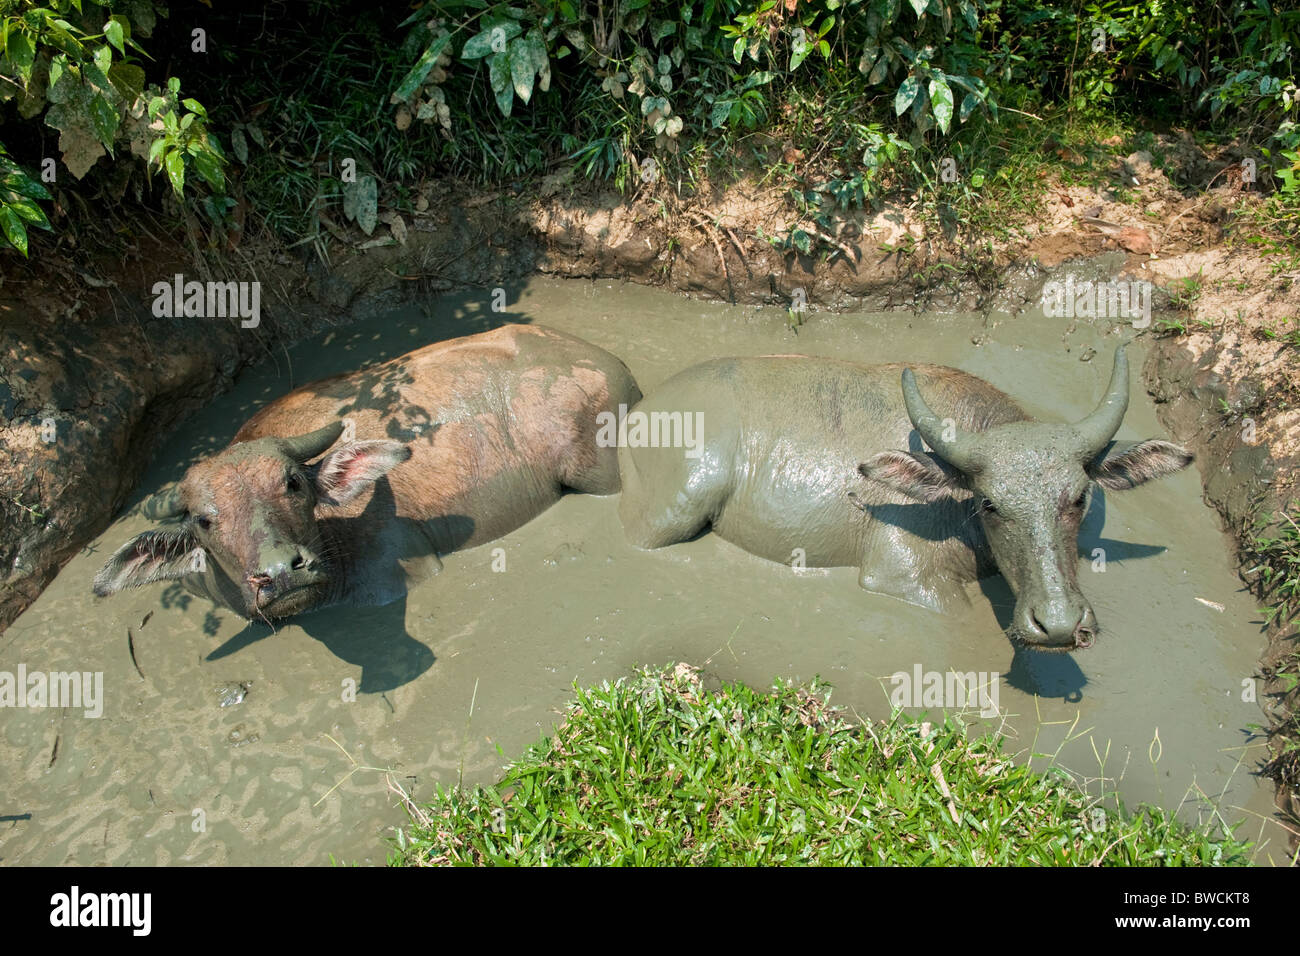 Water buffalo wallowing in a mud pool. North Vietnam Stock Photo